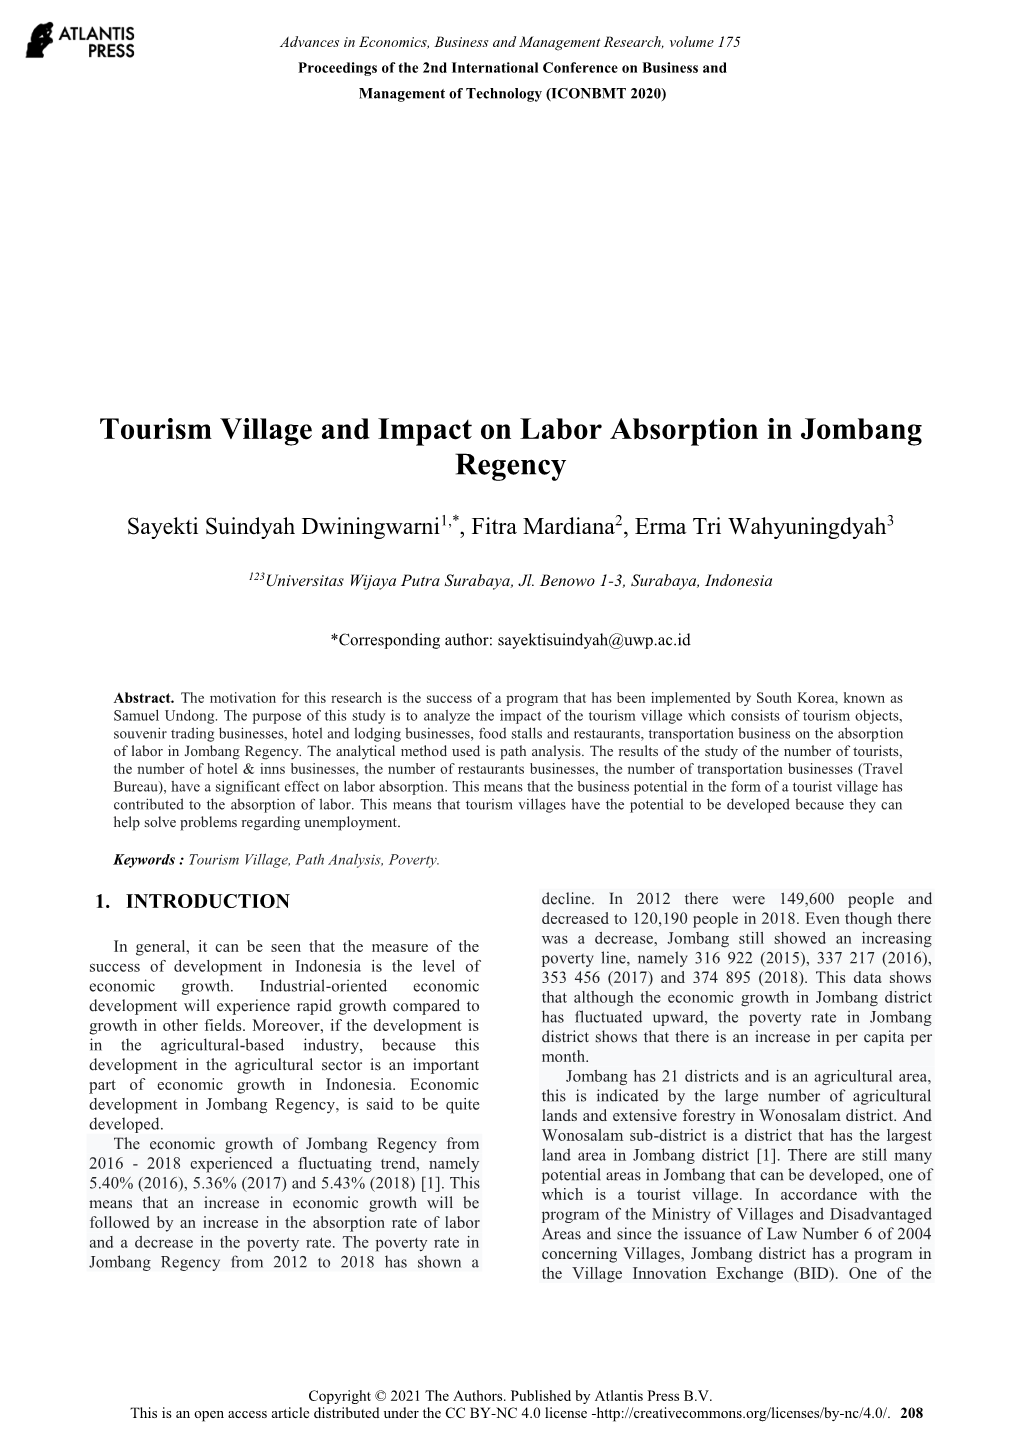 Tourism Village and Impact on Labor Absorption in Jombang Regency